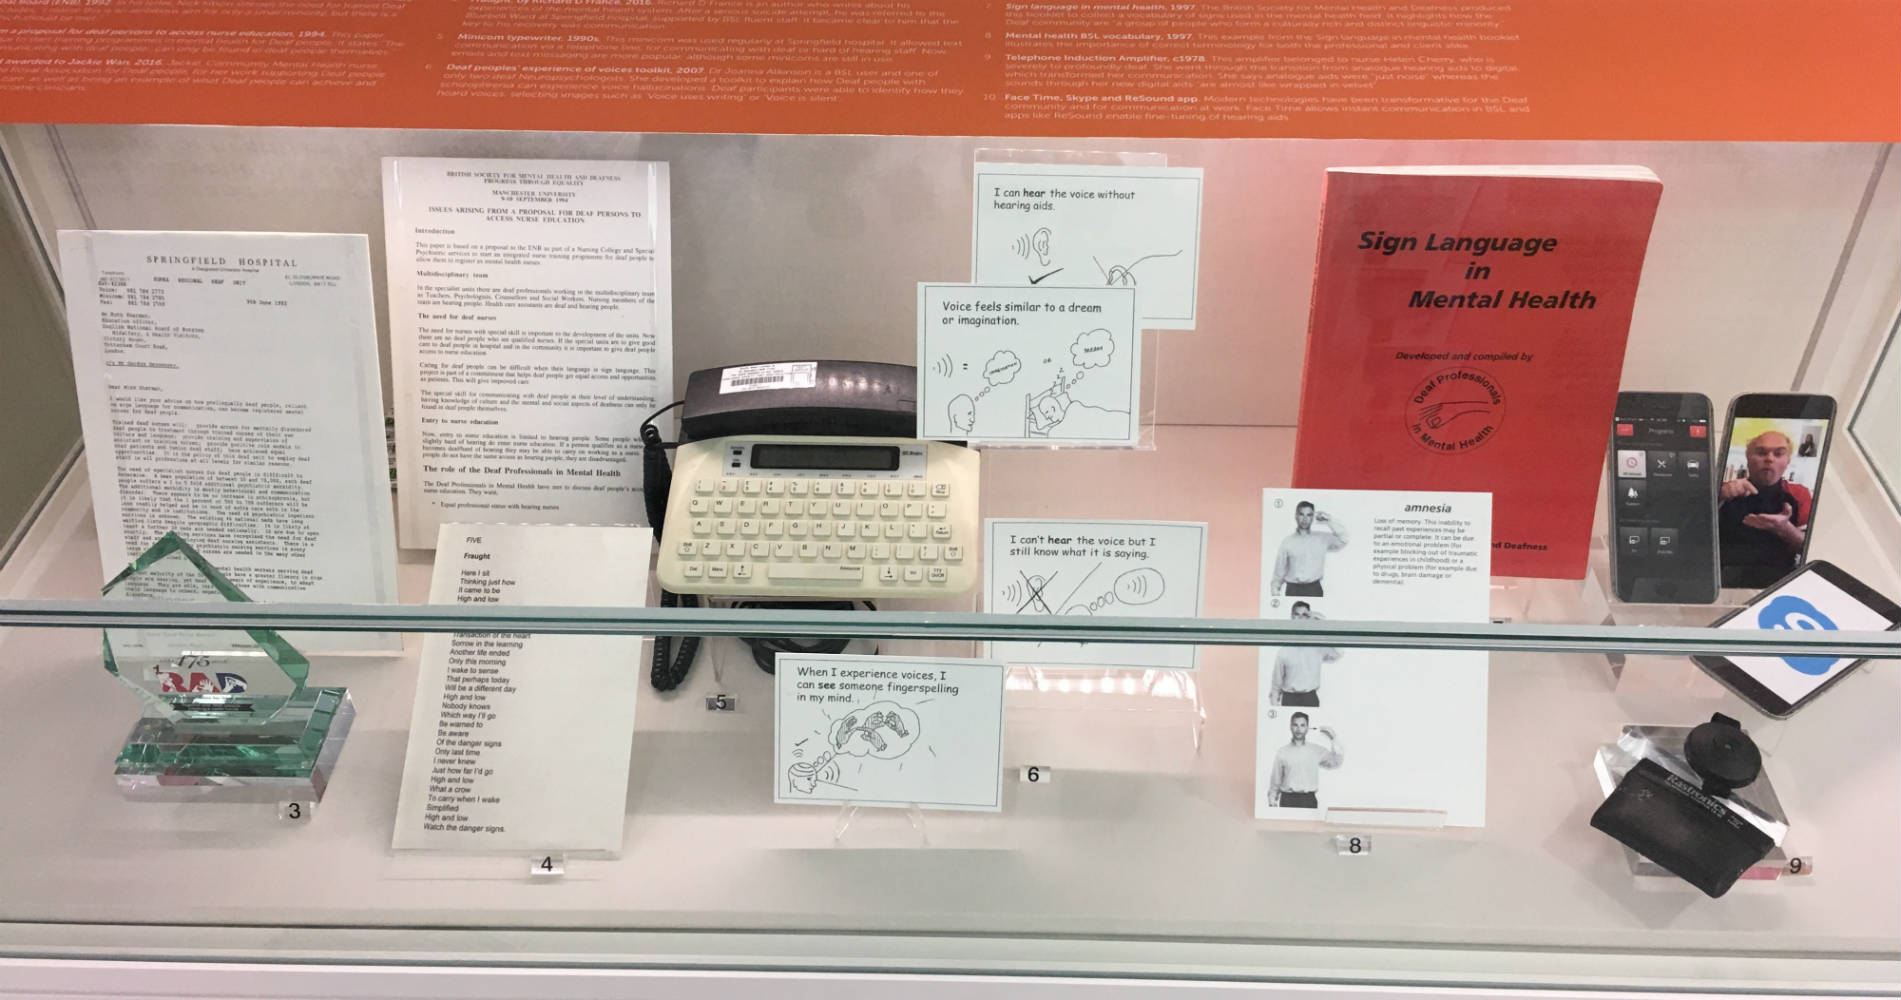 A display case showing items of the D/deaf nursing experience